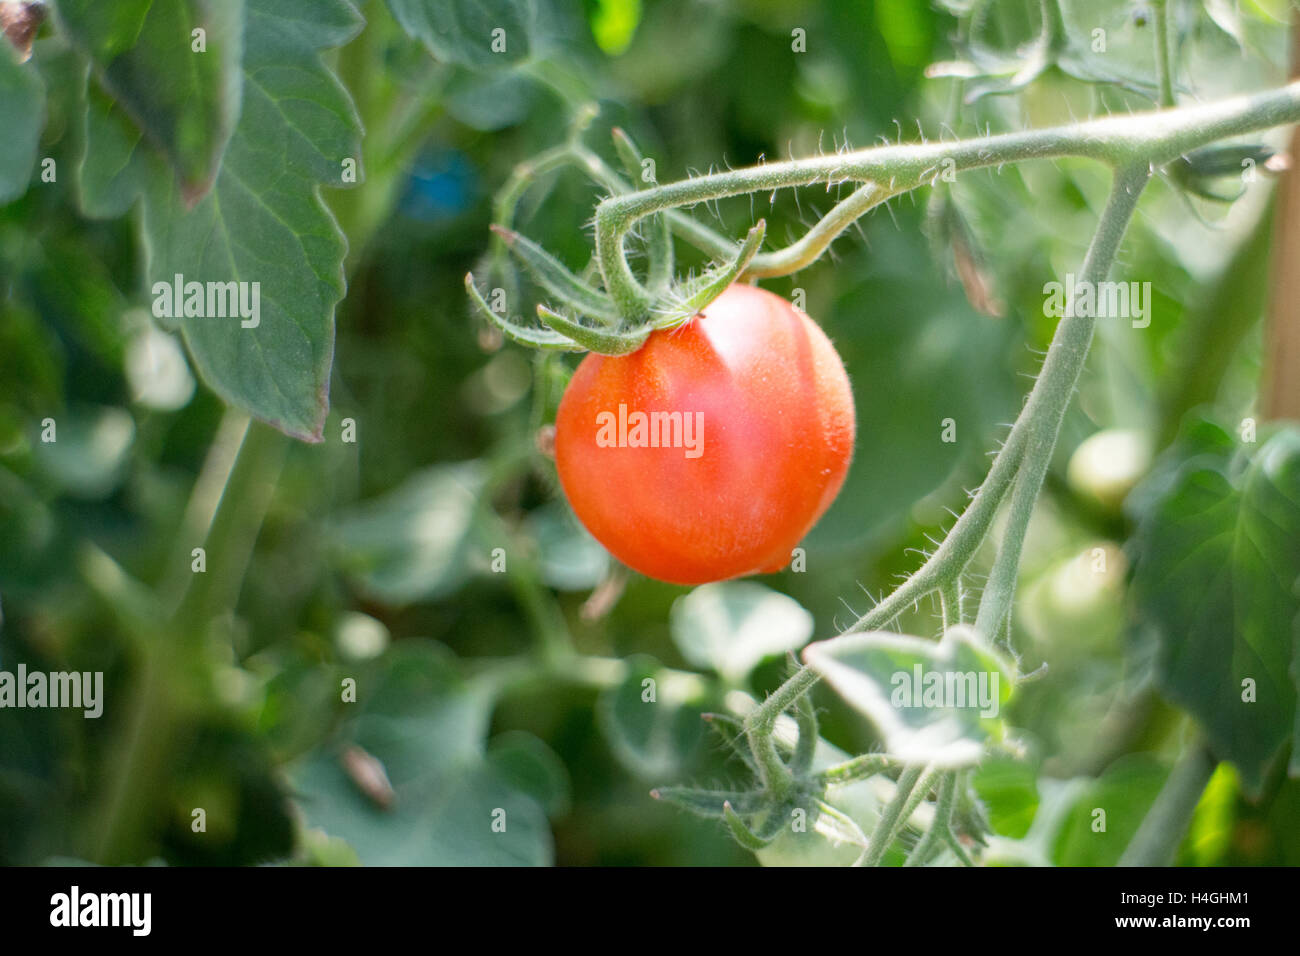 Tiger cherry tomato growing on the vine on a farm in the greenhouse on Vancouver Island, farm inspired Stock Photo